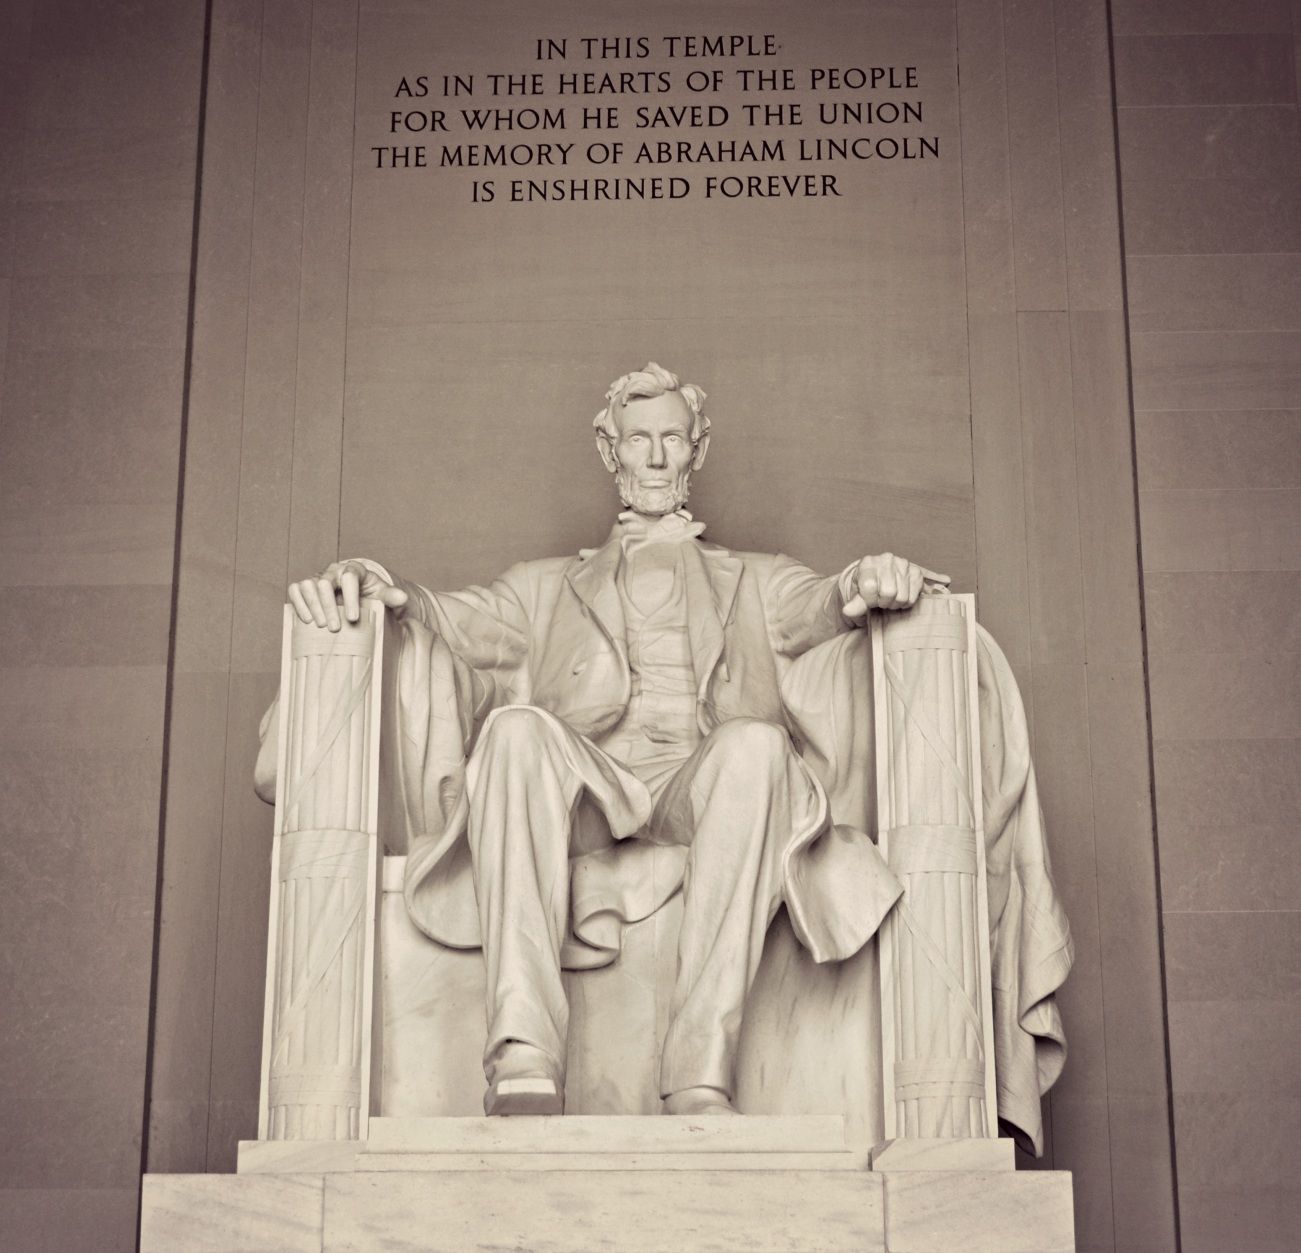 /assets/contentimages/Lincoln_Memorial_Statue.jpg